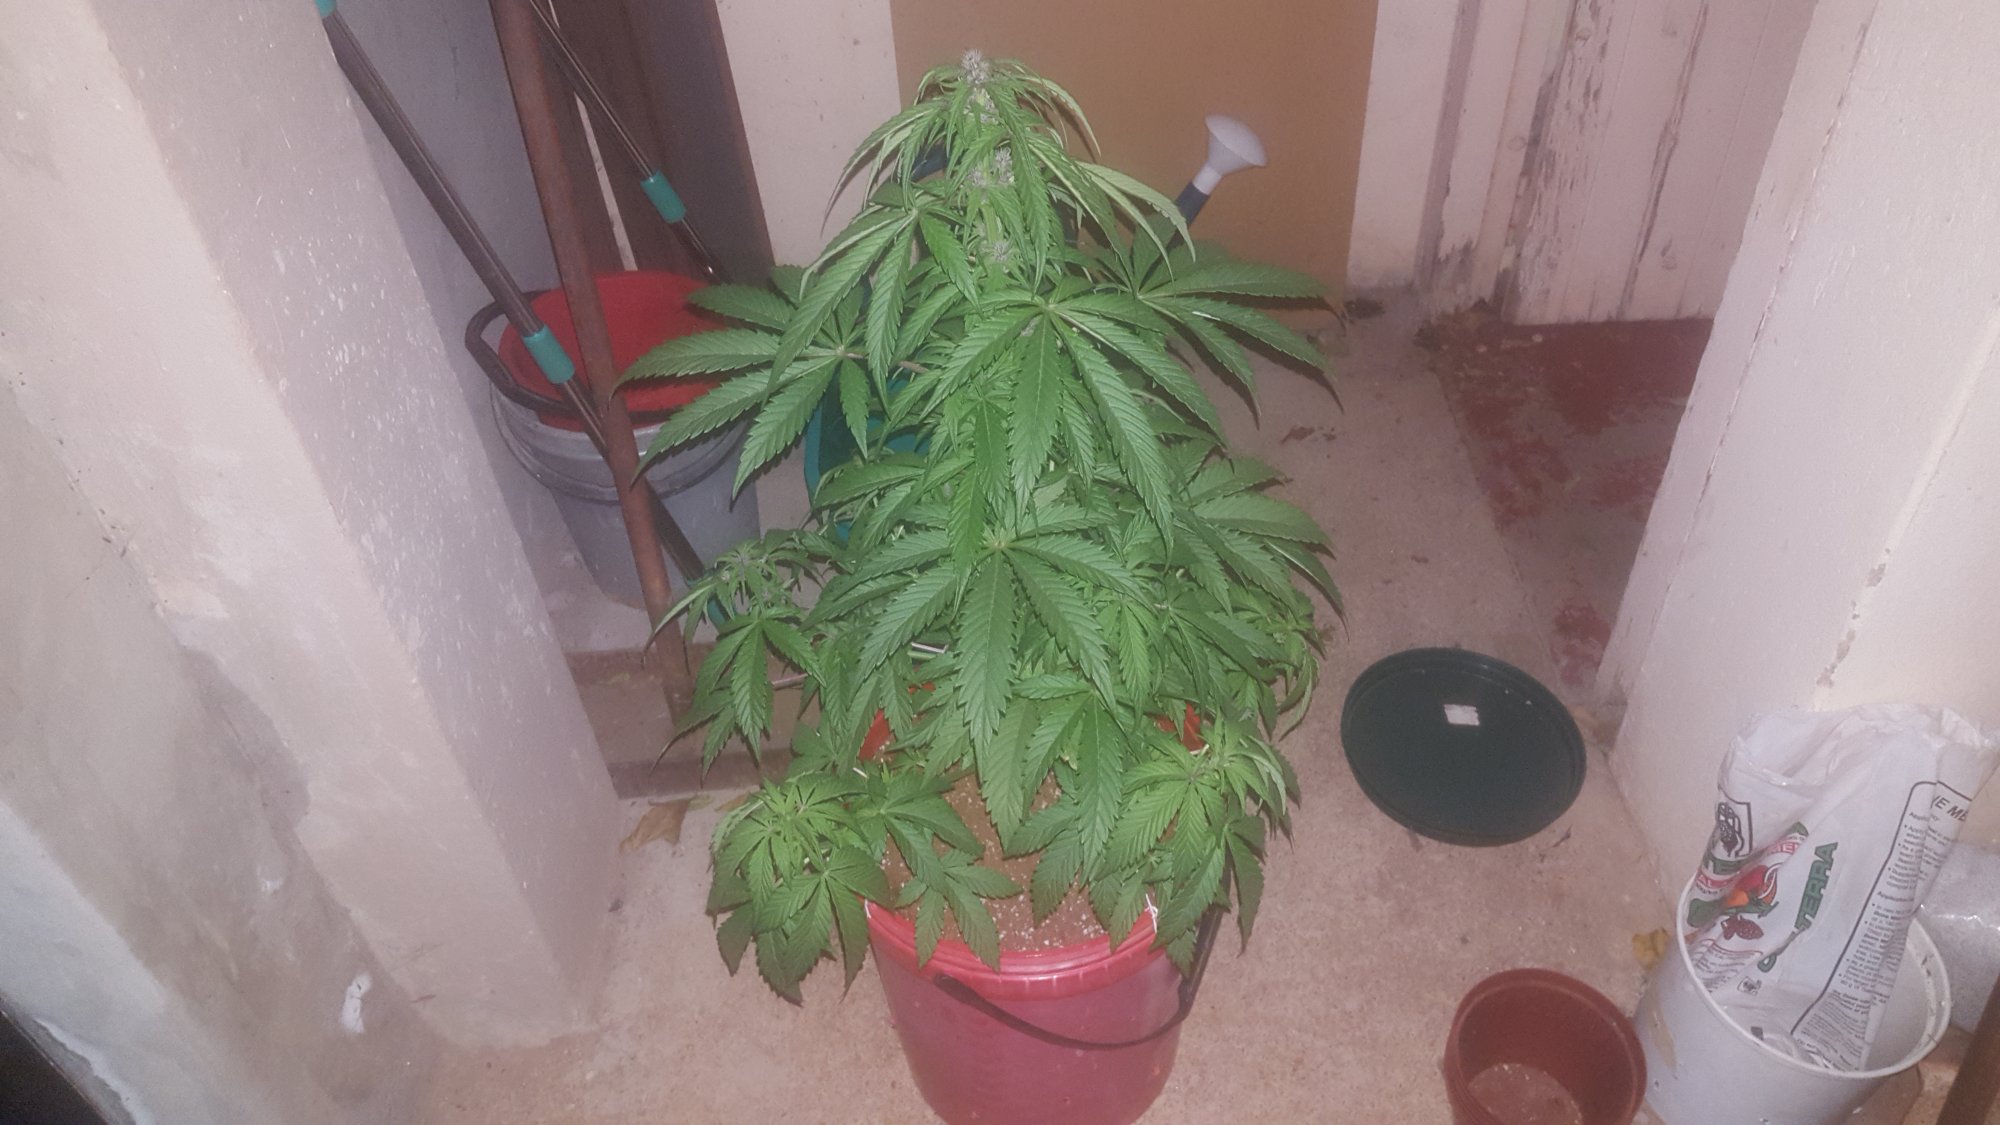 Day 79 from seedjust an update